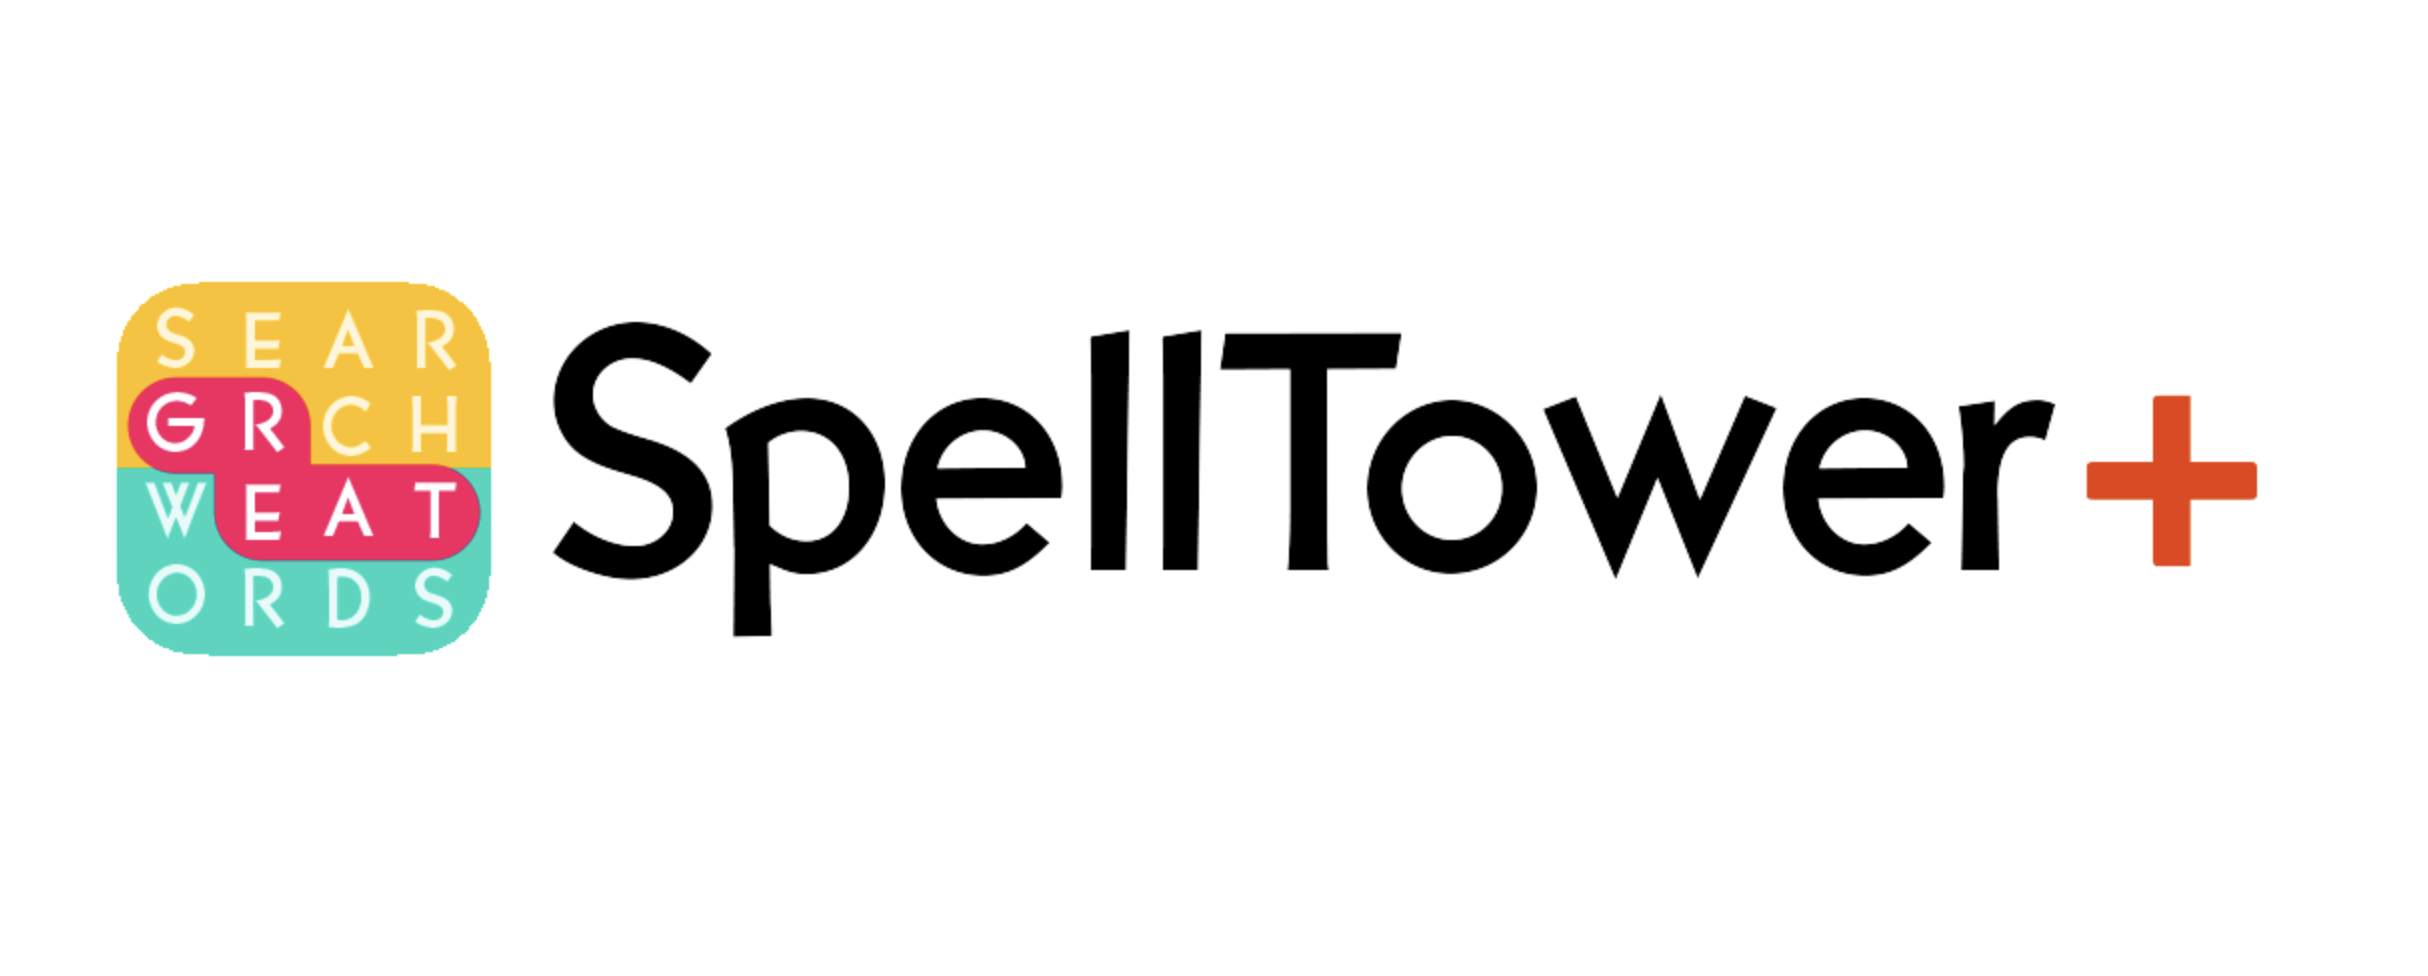 spelltower android download